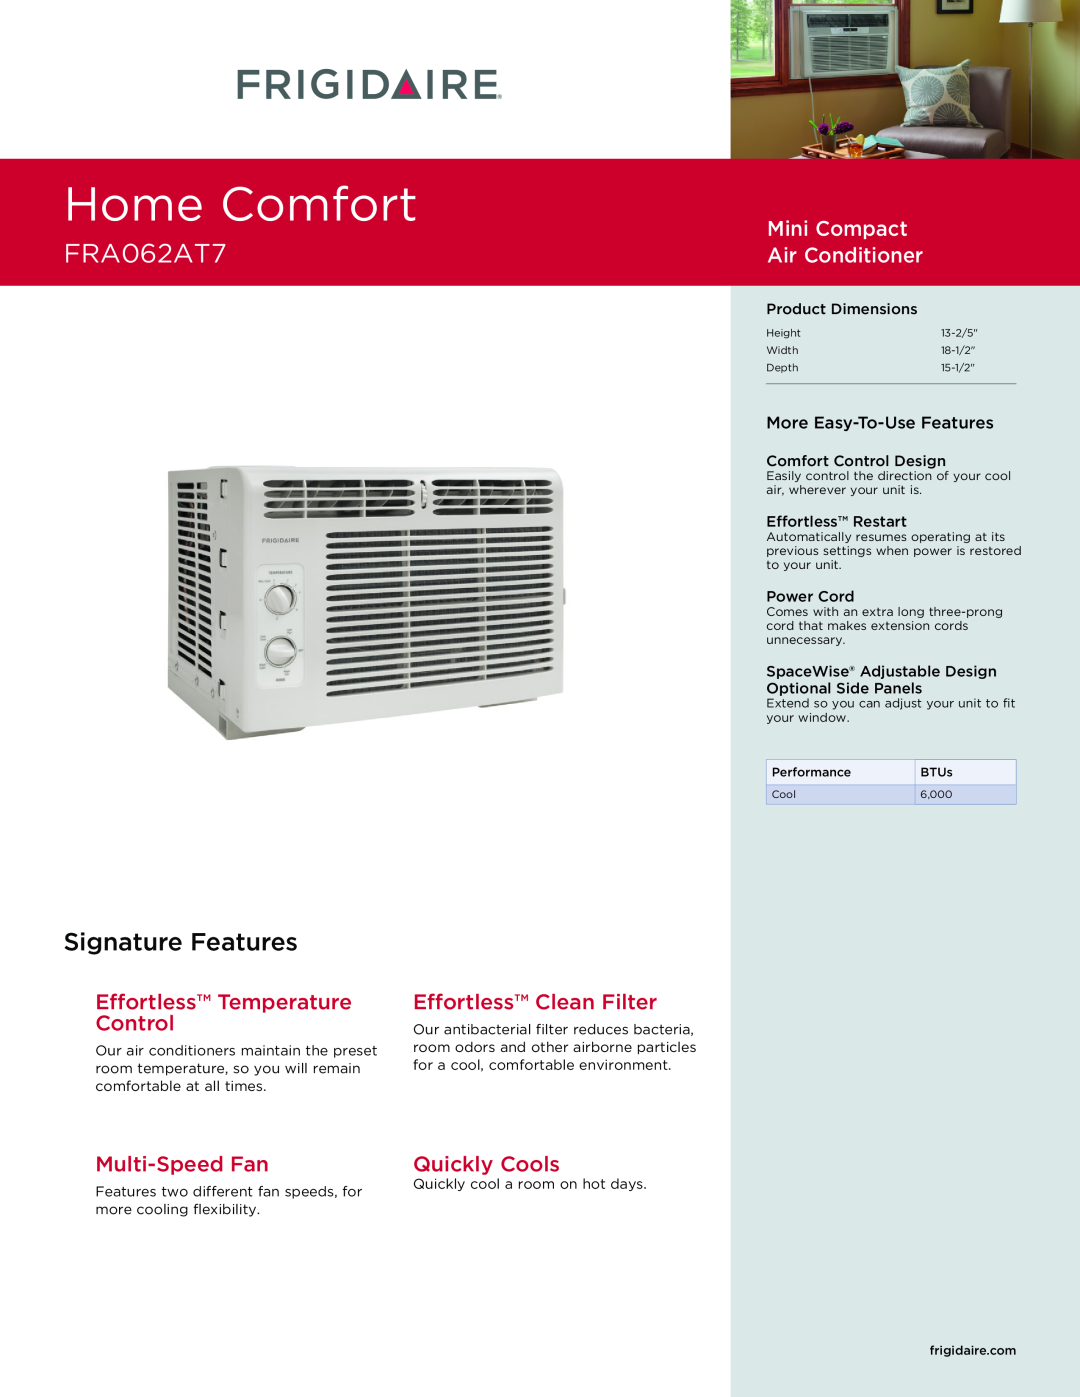 Frigidaire FRA062AT7 dimensions Home Comfort, Signature Features, Mini Compact Air Conditioner , Effortless Clean Filter 